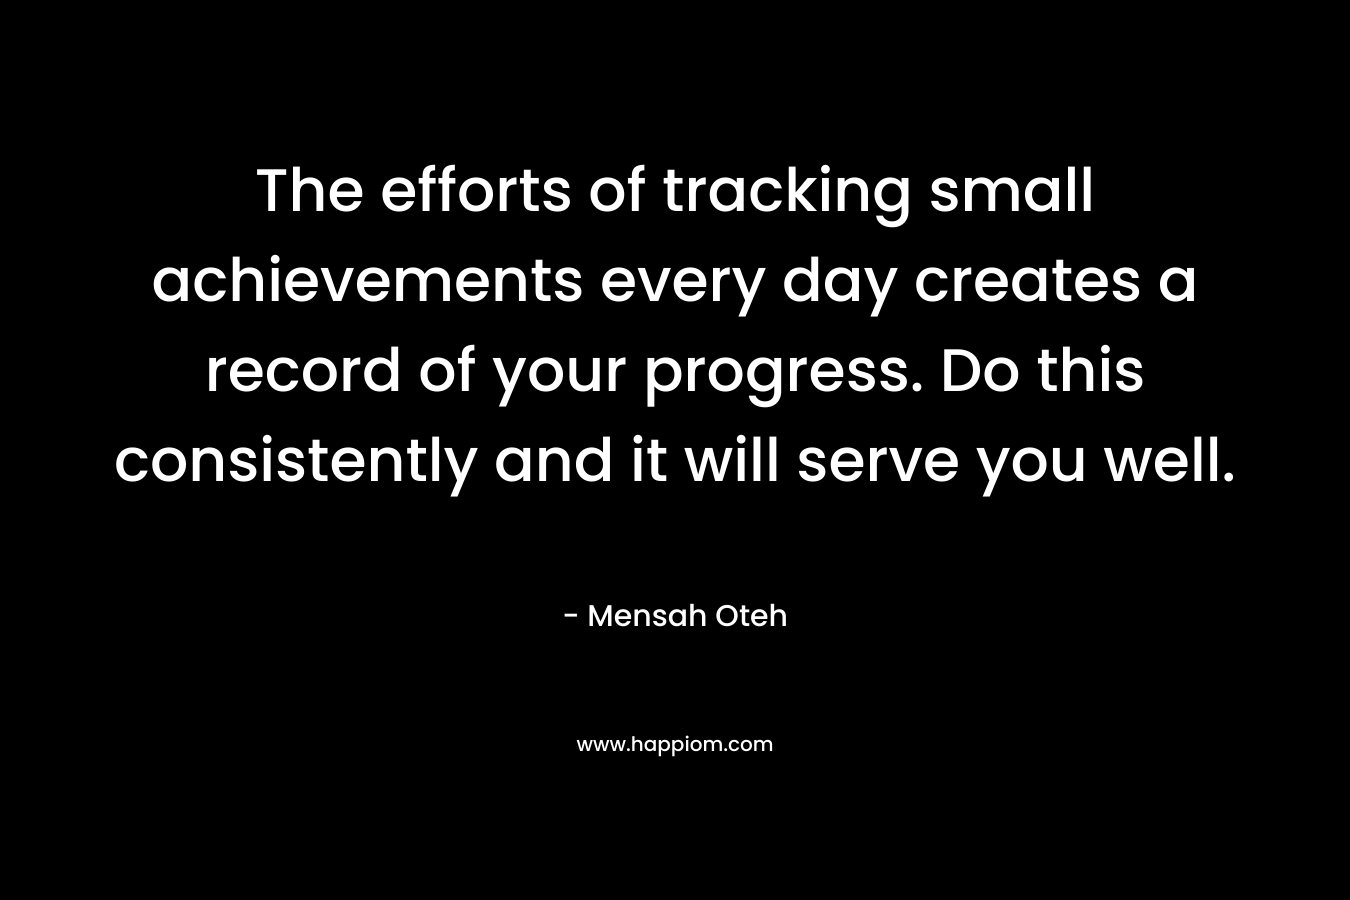 The efforts of tracking small achievements every day creates a record of your progress. Do this consistently and it will serve you well.